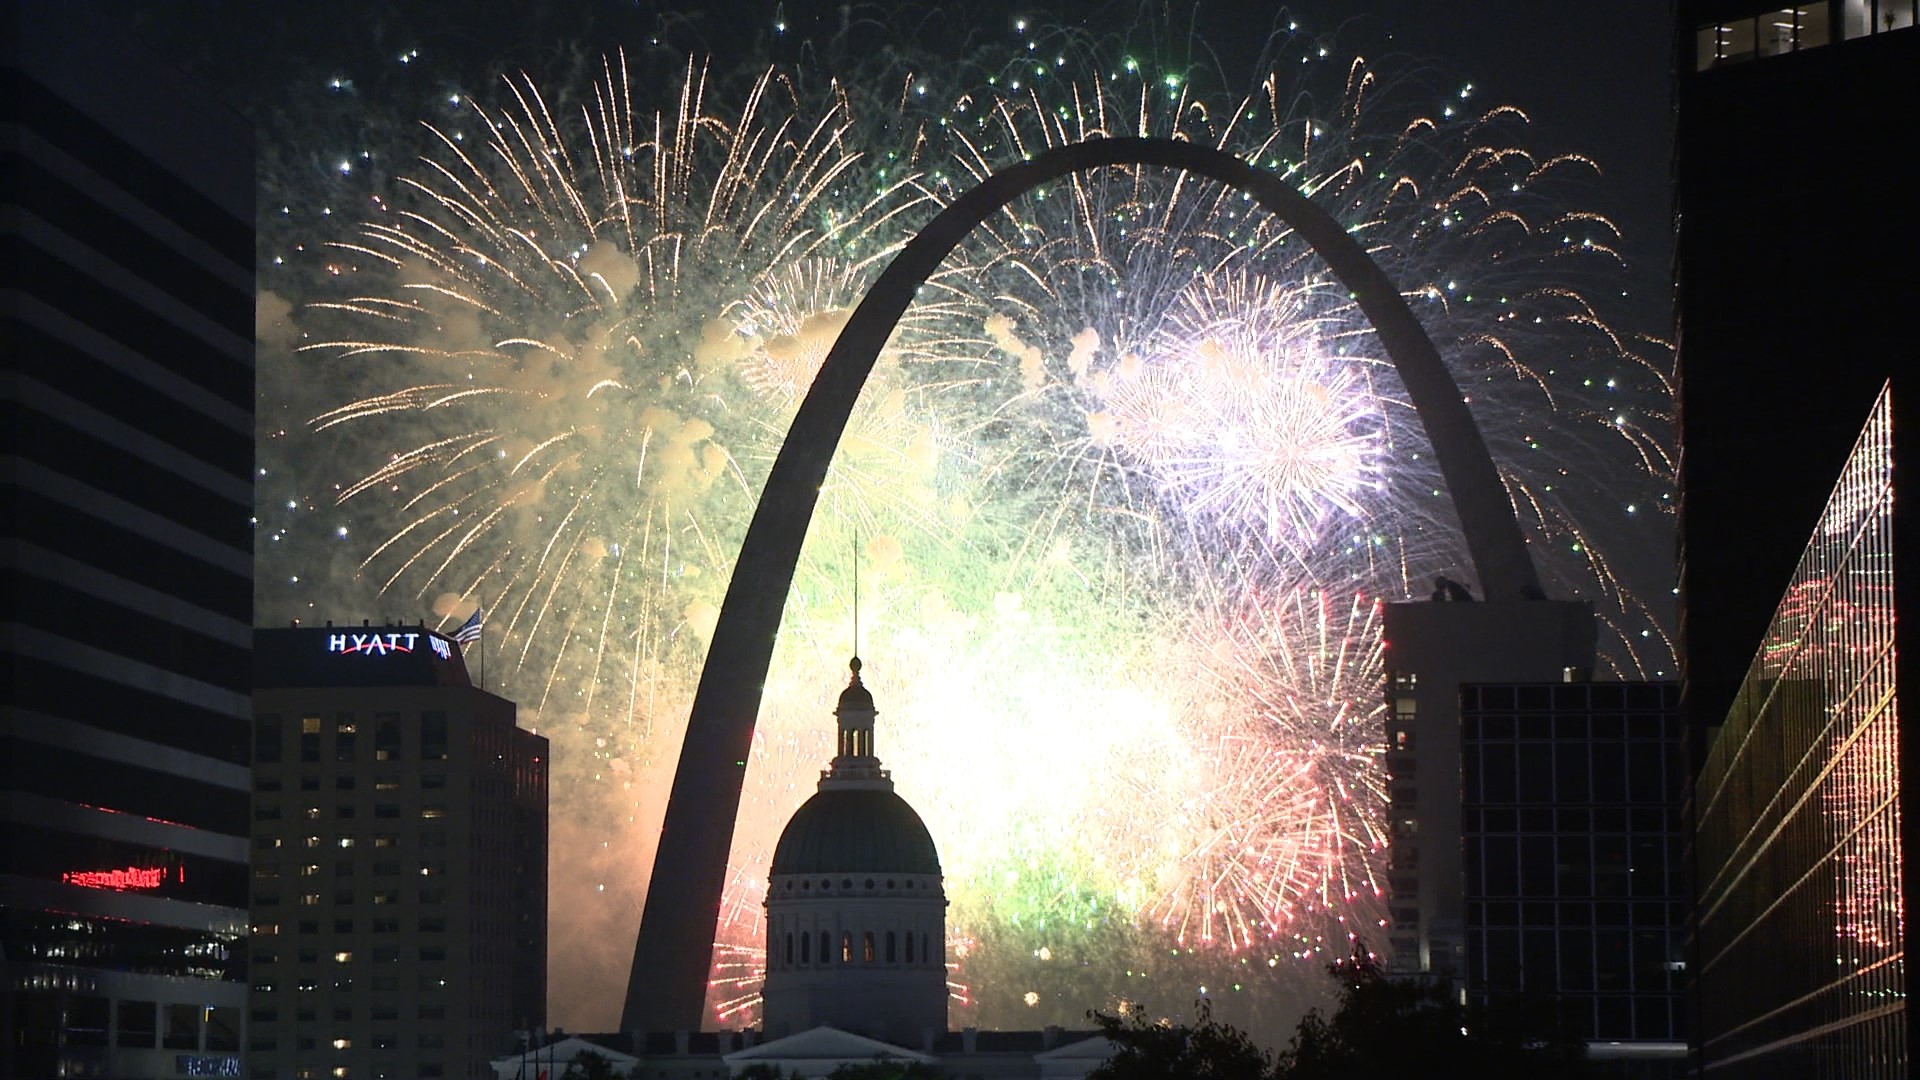 Fireworks shows on Wednesday and Thursday may be rained out as a severe storm system rolls through the St. Louis region.